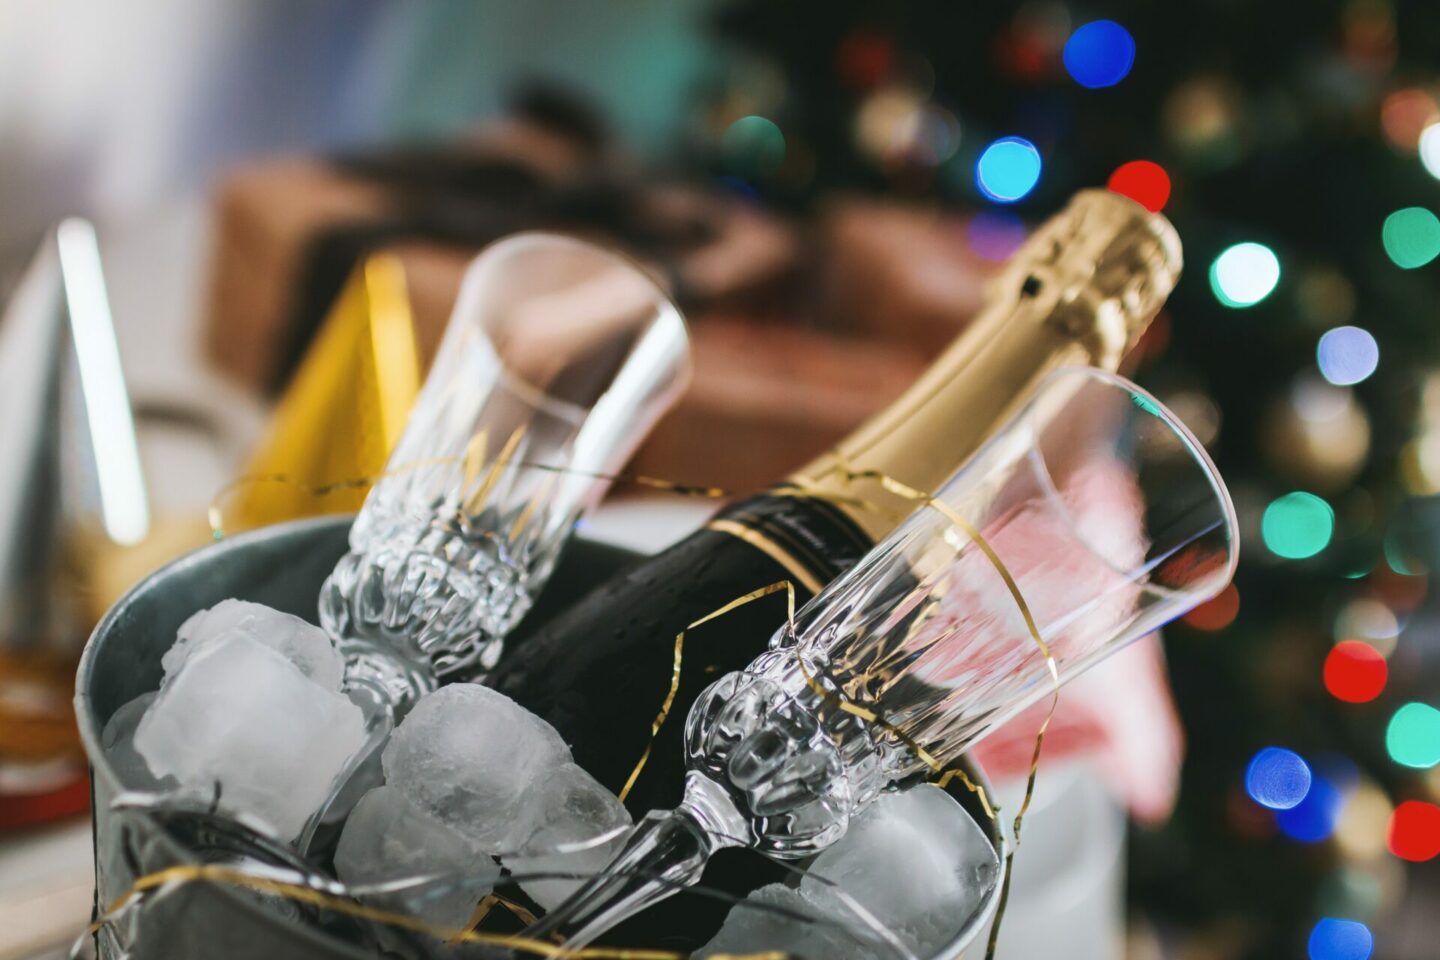 A bottle of champagne and two flute glasses sitting in an ice bucket